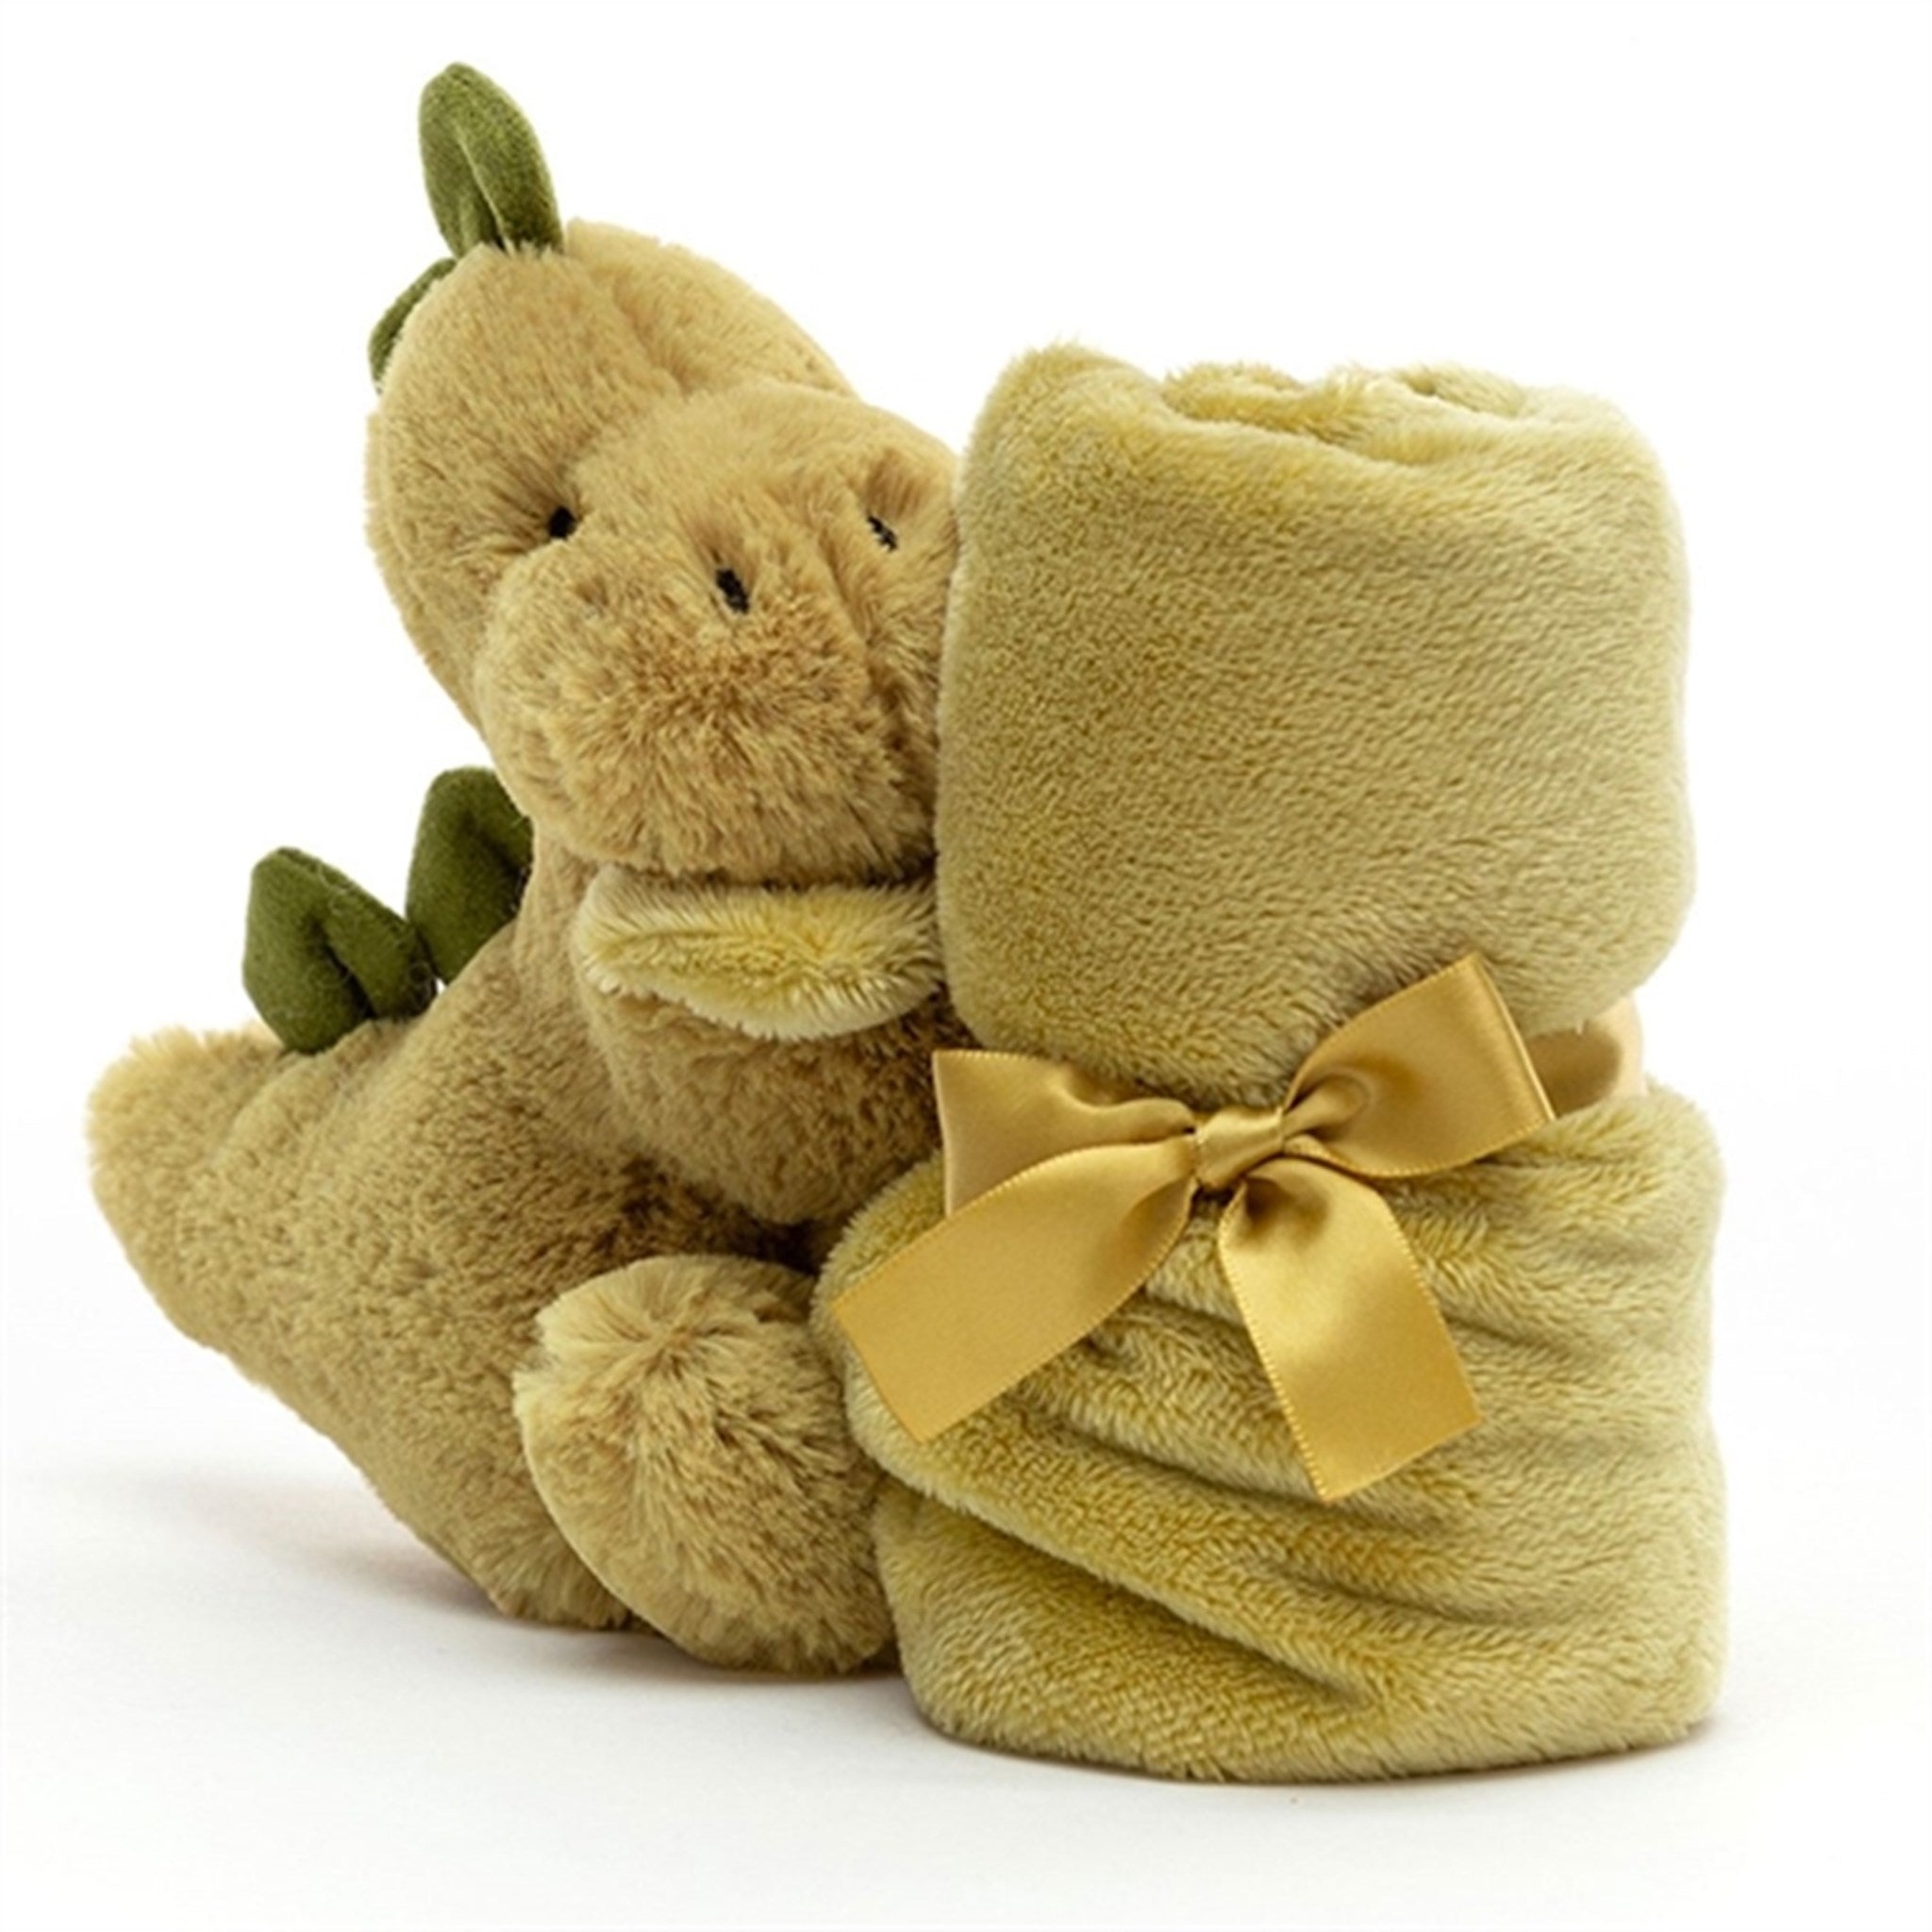 Jellycat Bashful Dino Soother 2